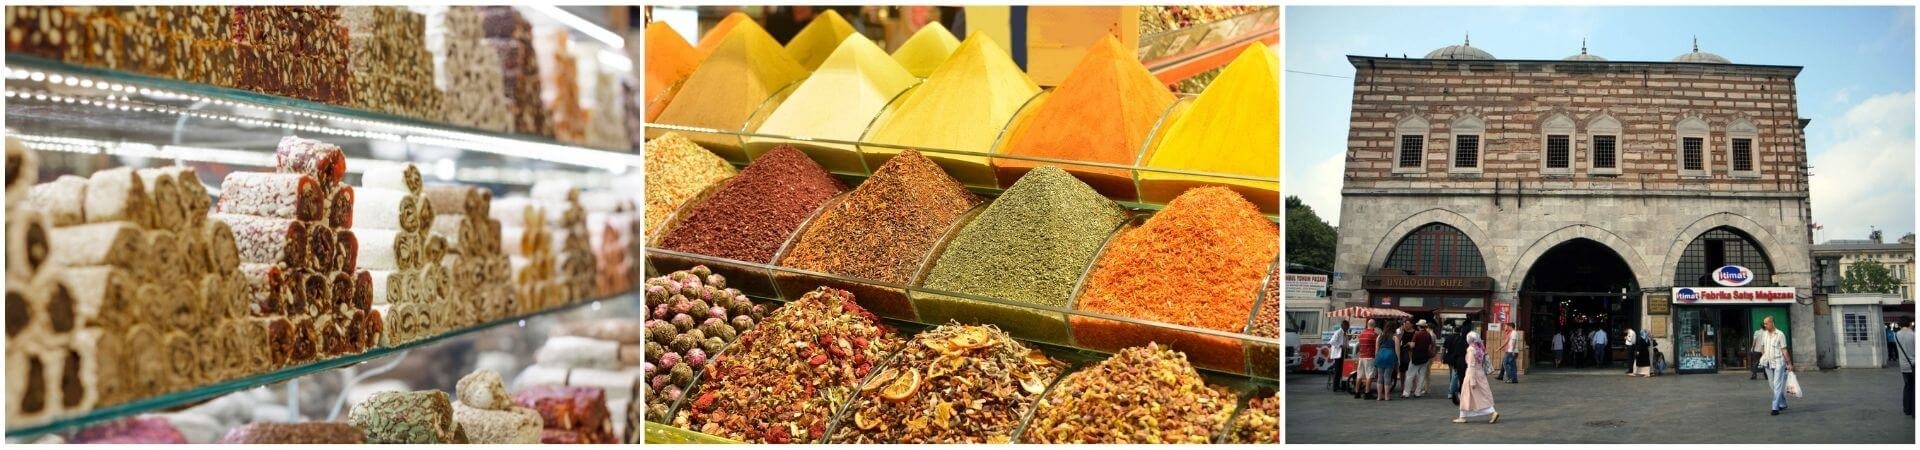 Spice Bazaar Istanbul Guided Tour